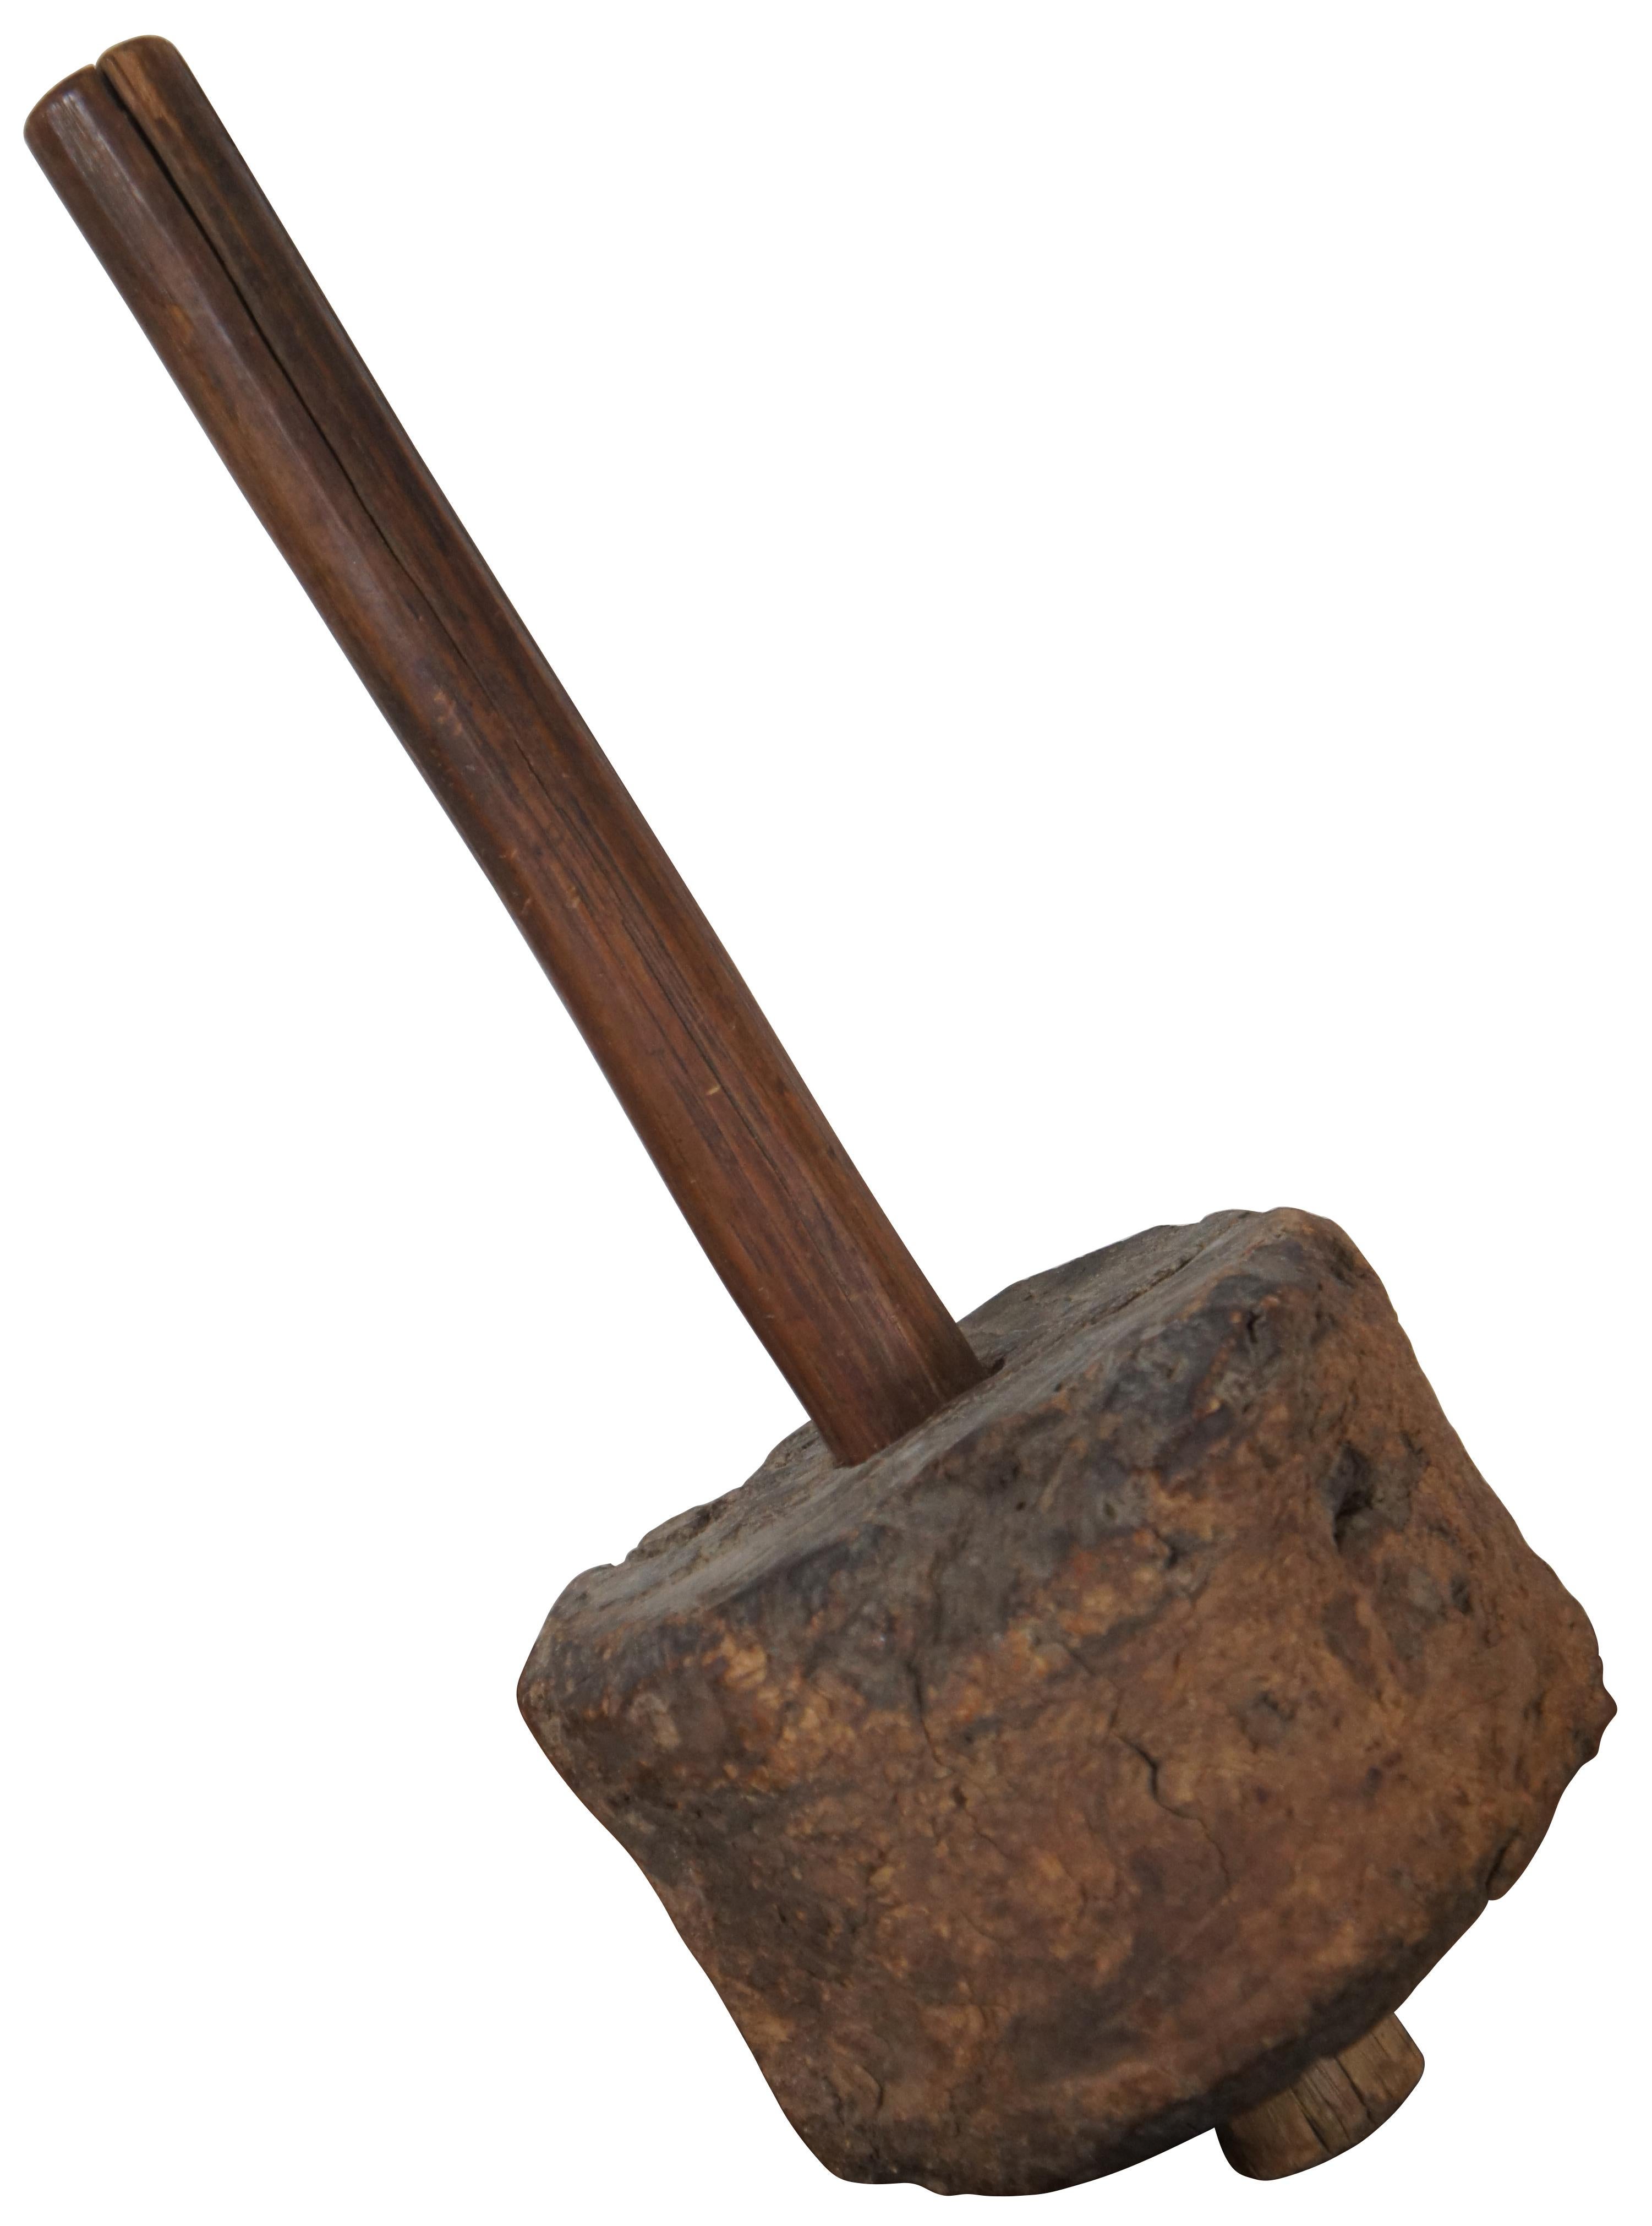 Antique hand crafted primitive / rustic wooden mallet with heavily distressed round burl wood head and handle. Measure: 14